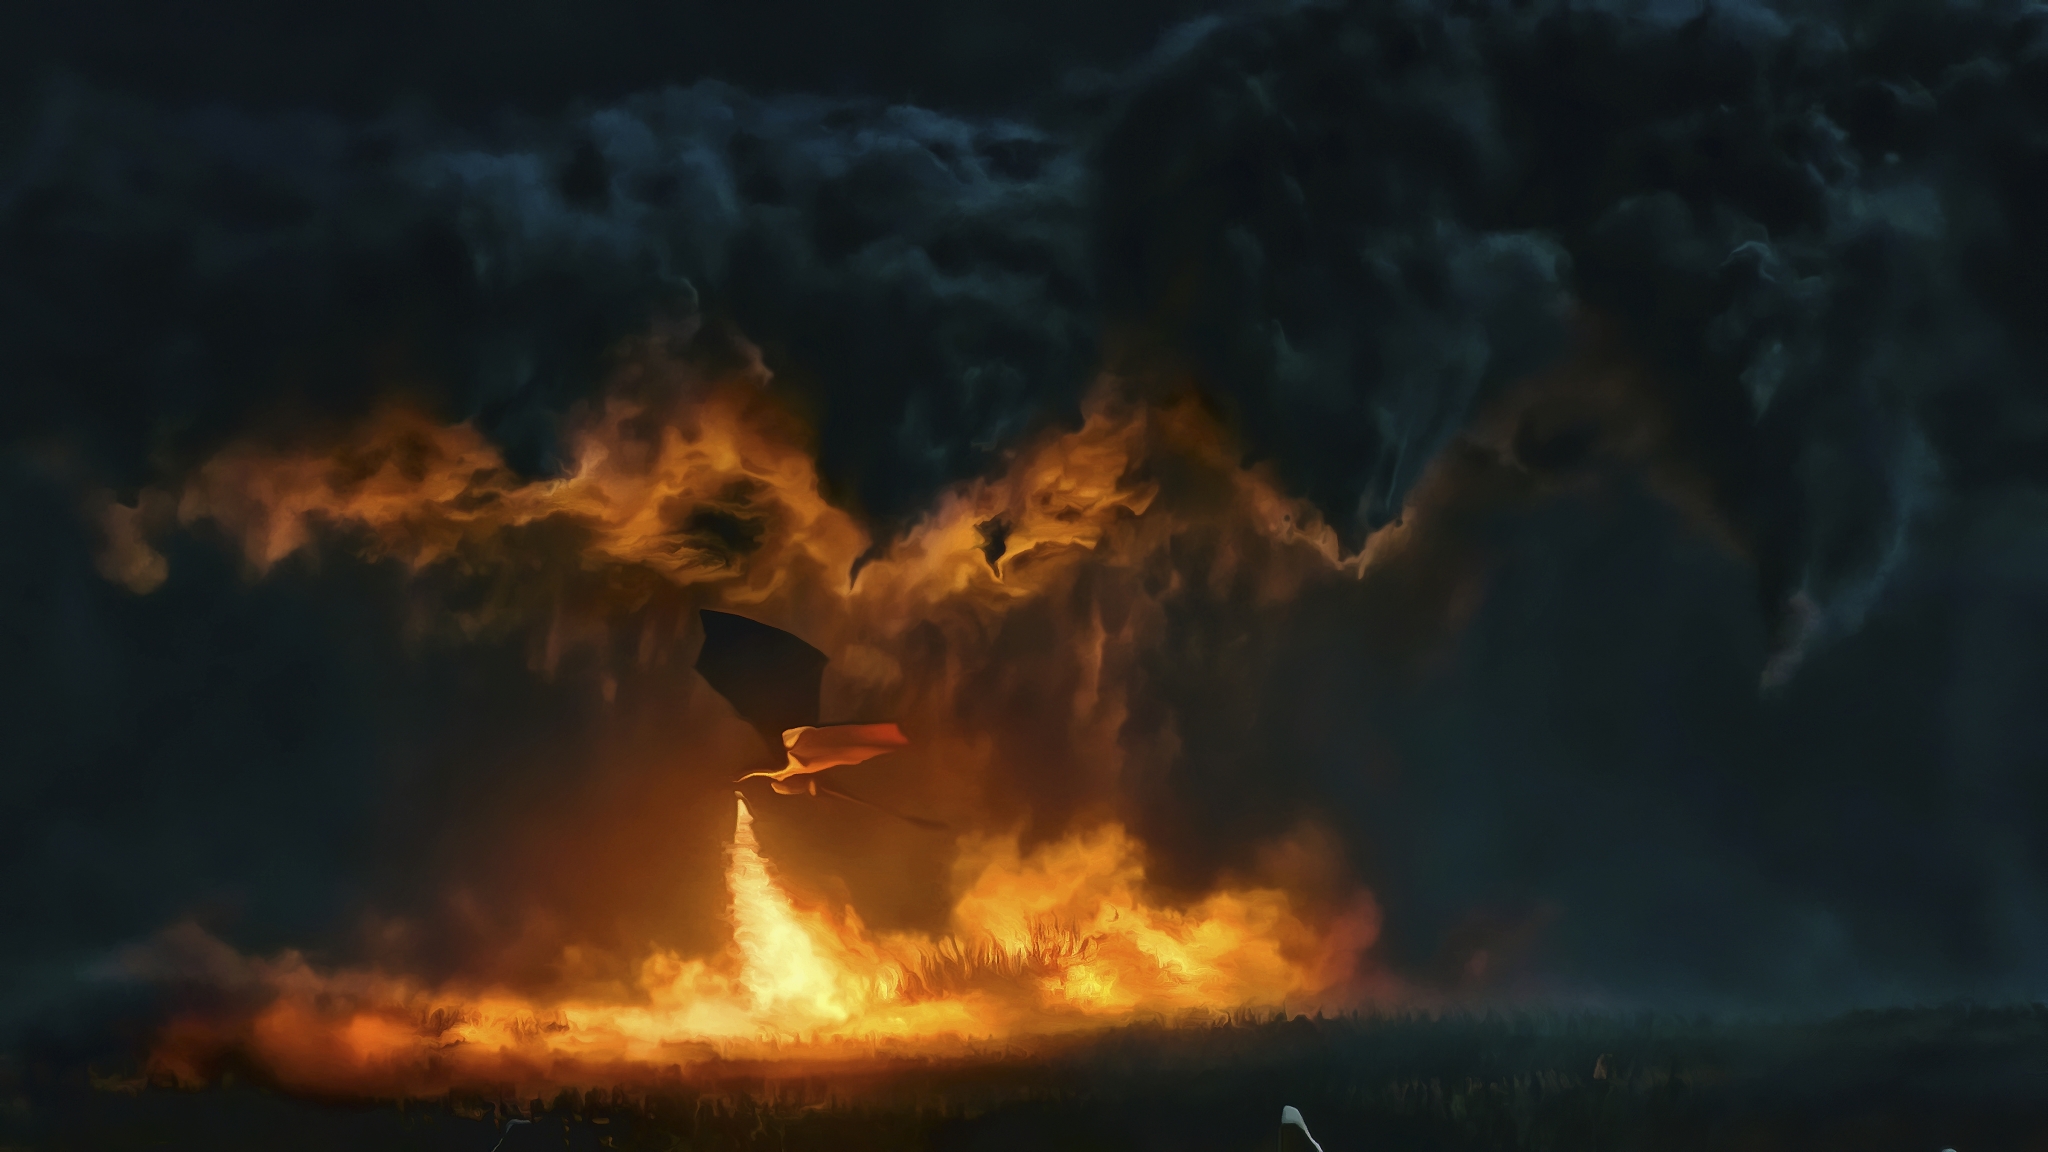 2048x1152 Game Of Thrones Dragon Fire 2048x1152 Resolution Wallpaper